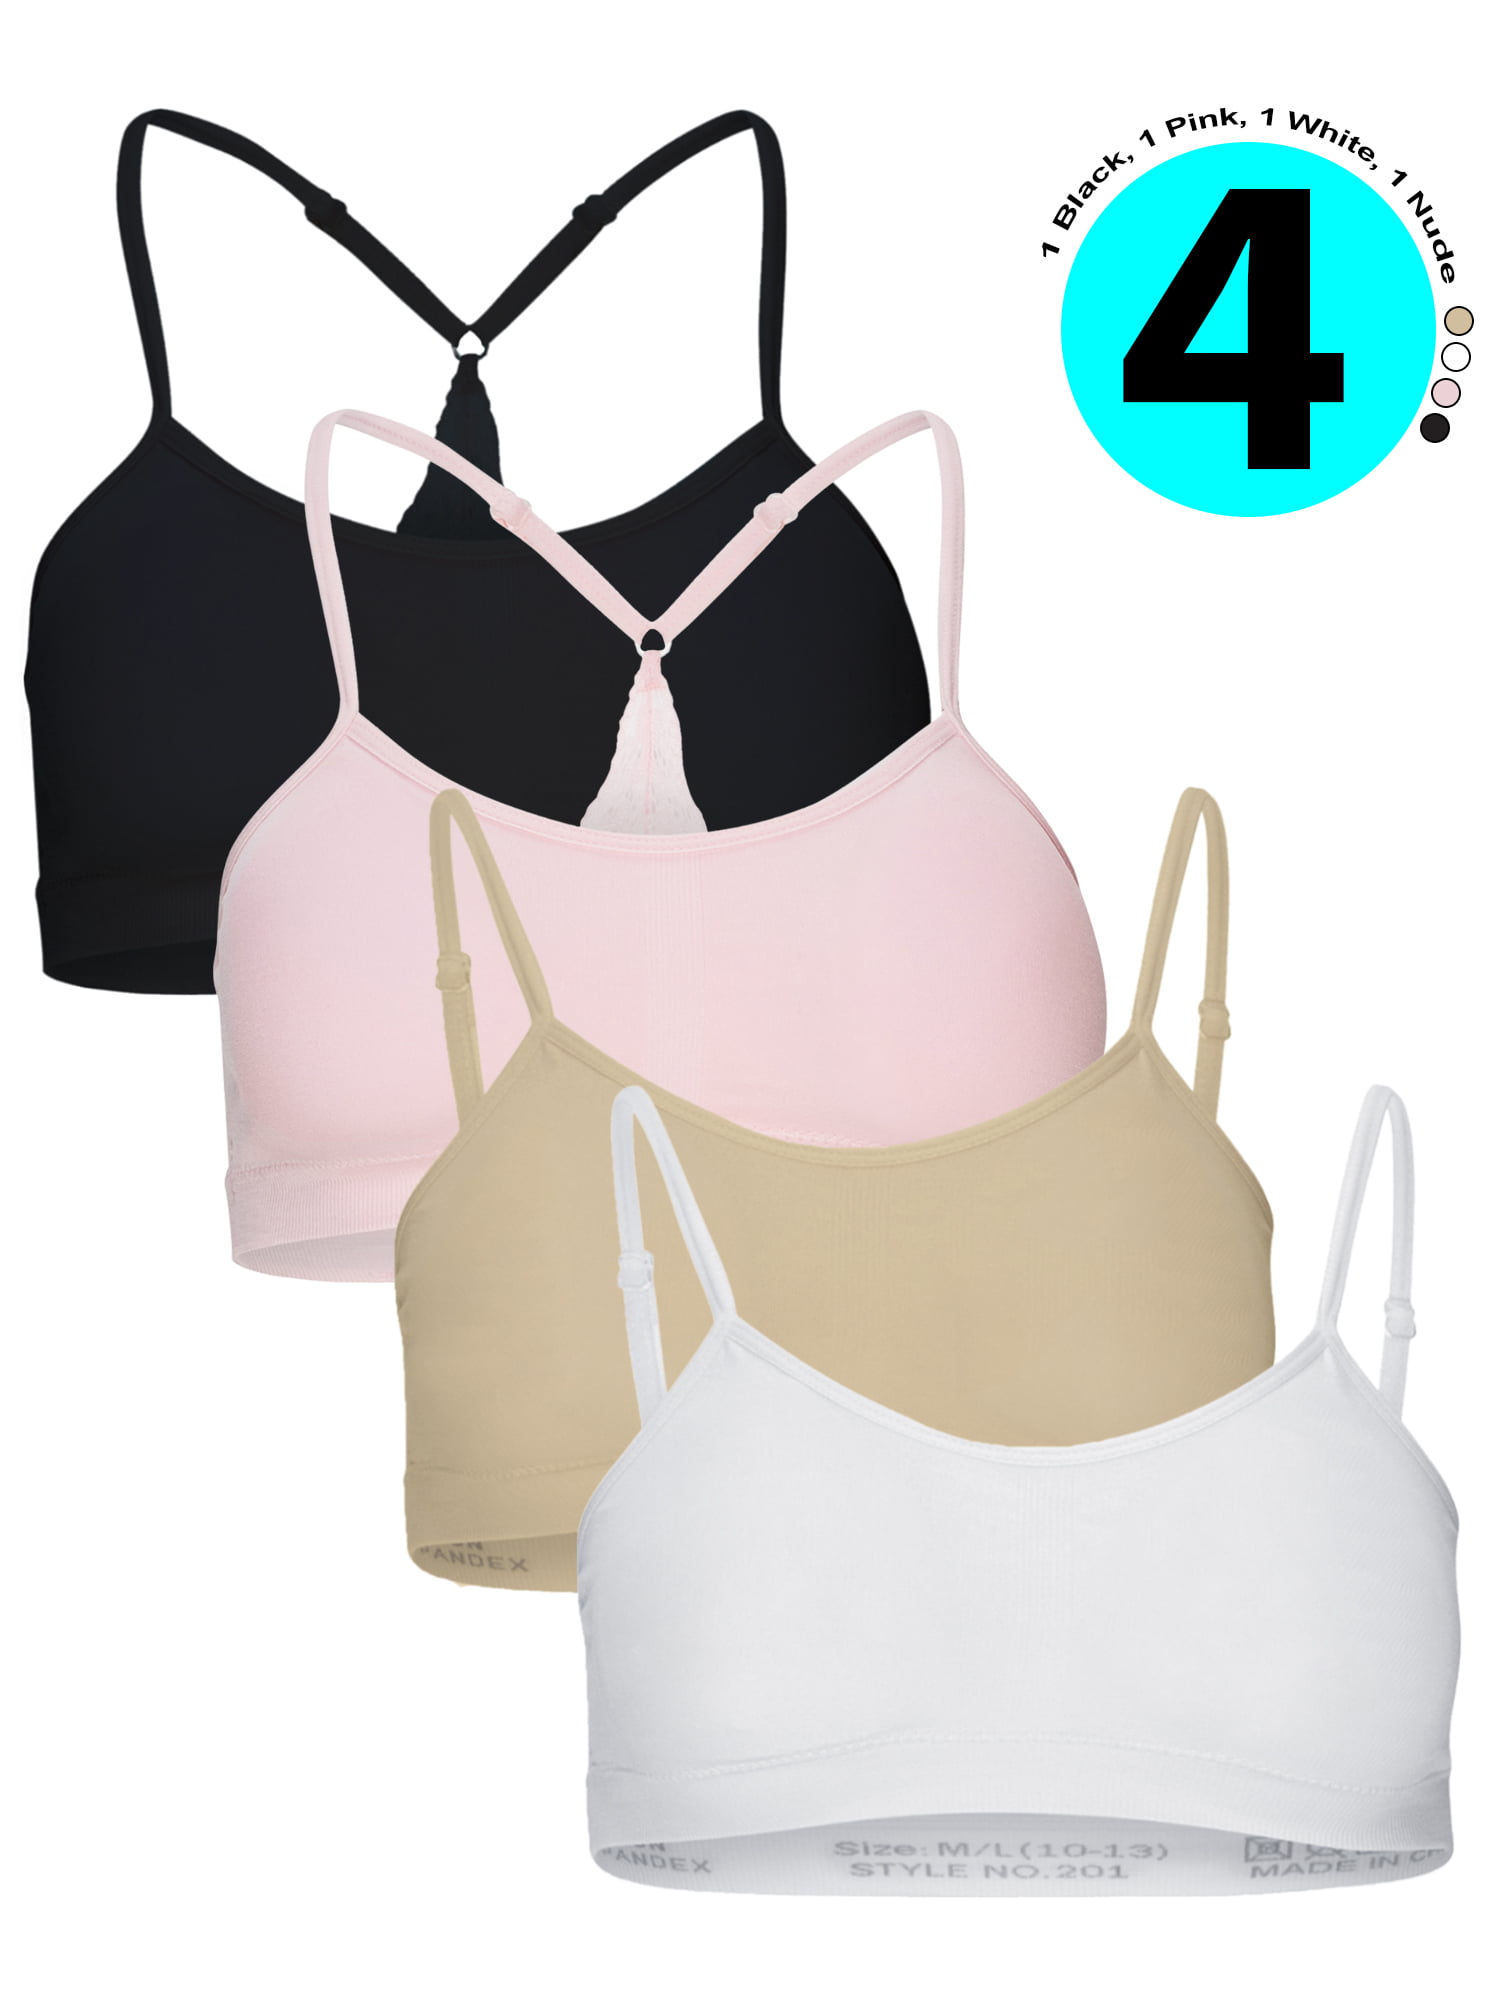  Girls Strapless Bandeau Bra - Girls Training Bras for Teens.  Sports Bra 8-14 Age. Wireless Seamless Bra. 4 Pack Skin Color : Clothing,  Shoes & Jewelry